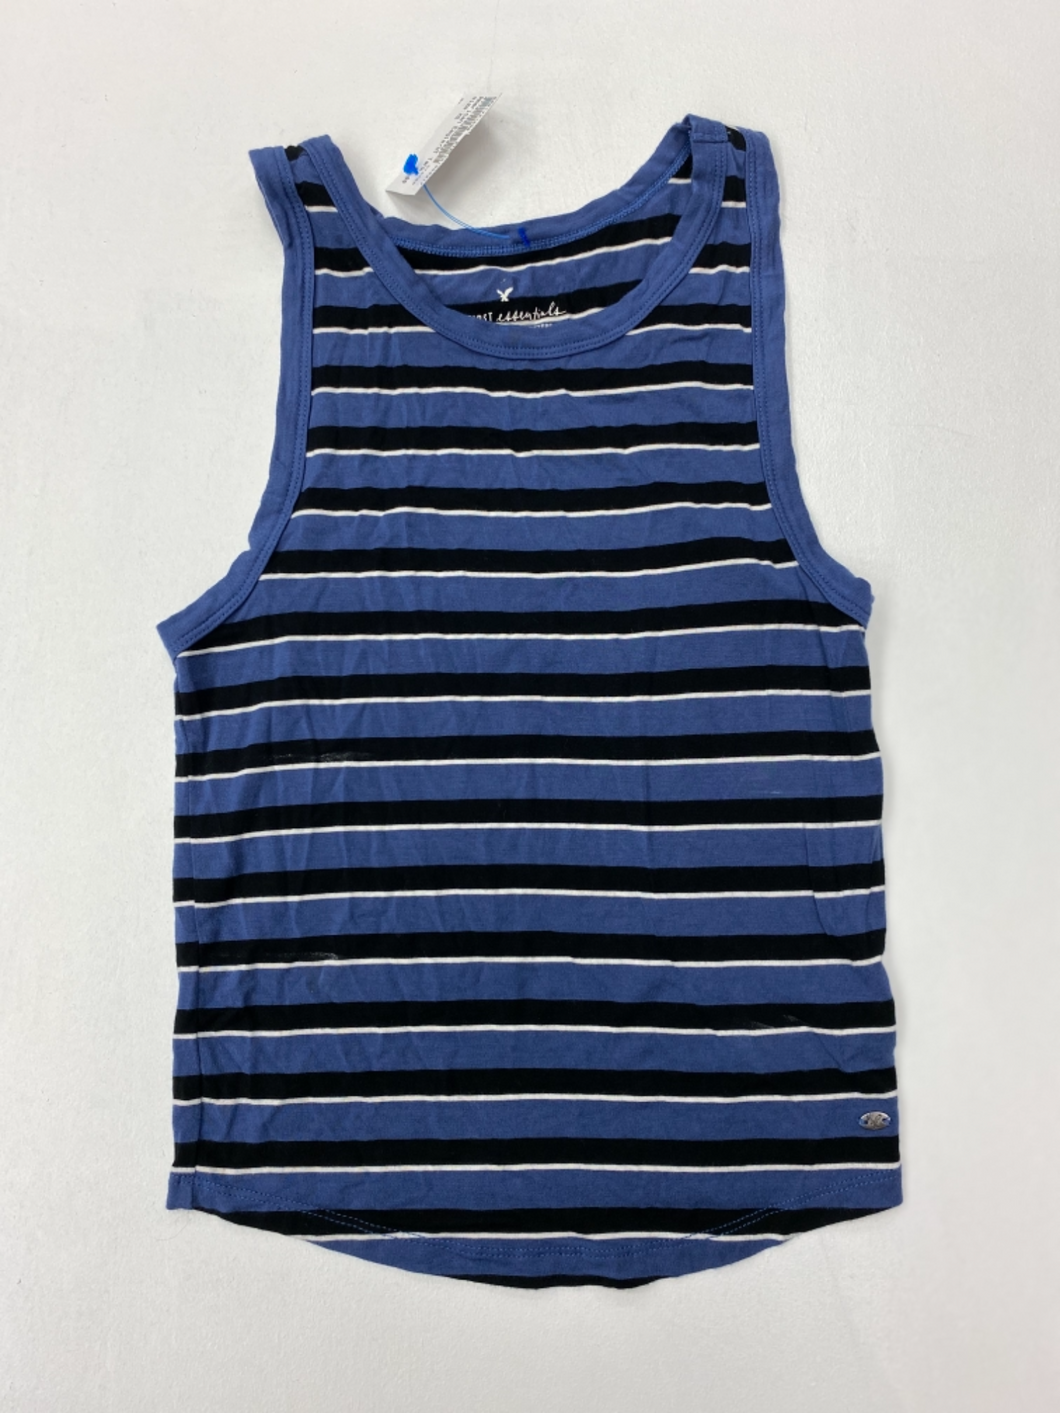 American Eagle Tank Top Size Extra Small